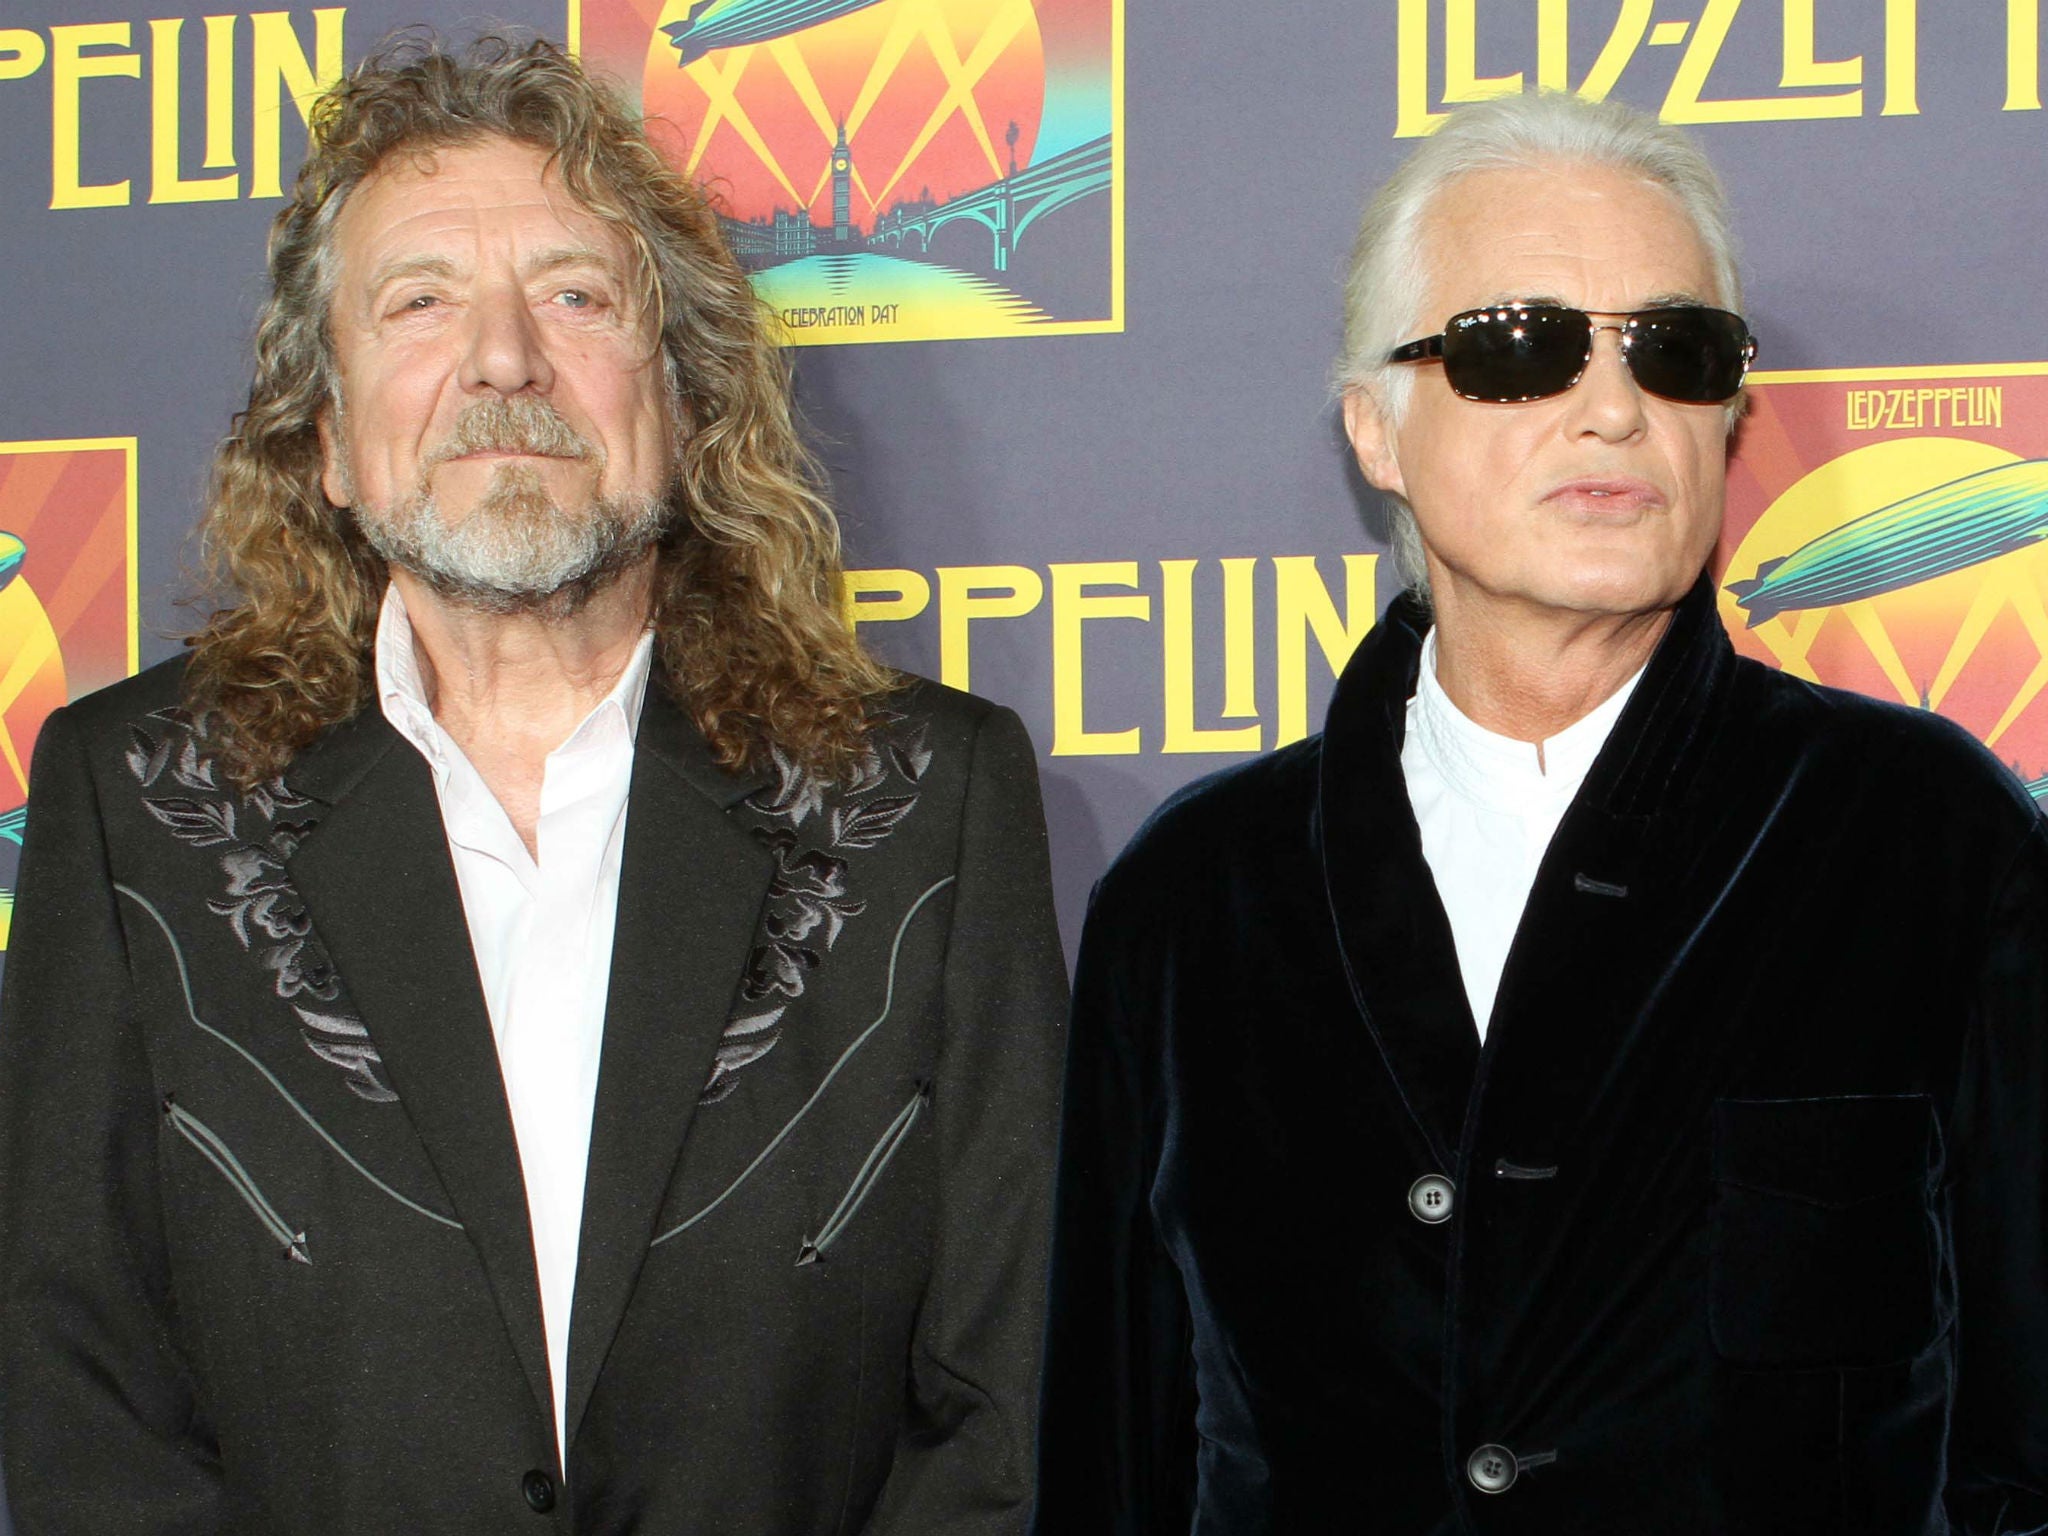 Robert Plant and Jimmy Page are due in court on 10 May accused of copyright infringement